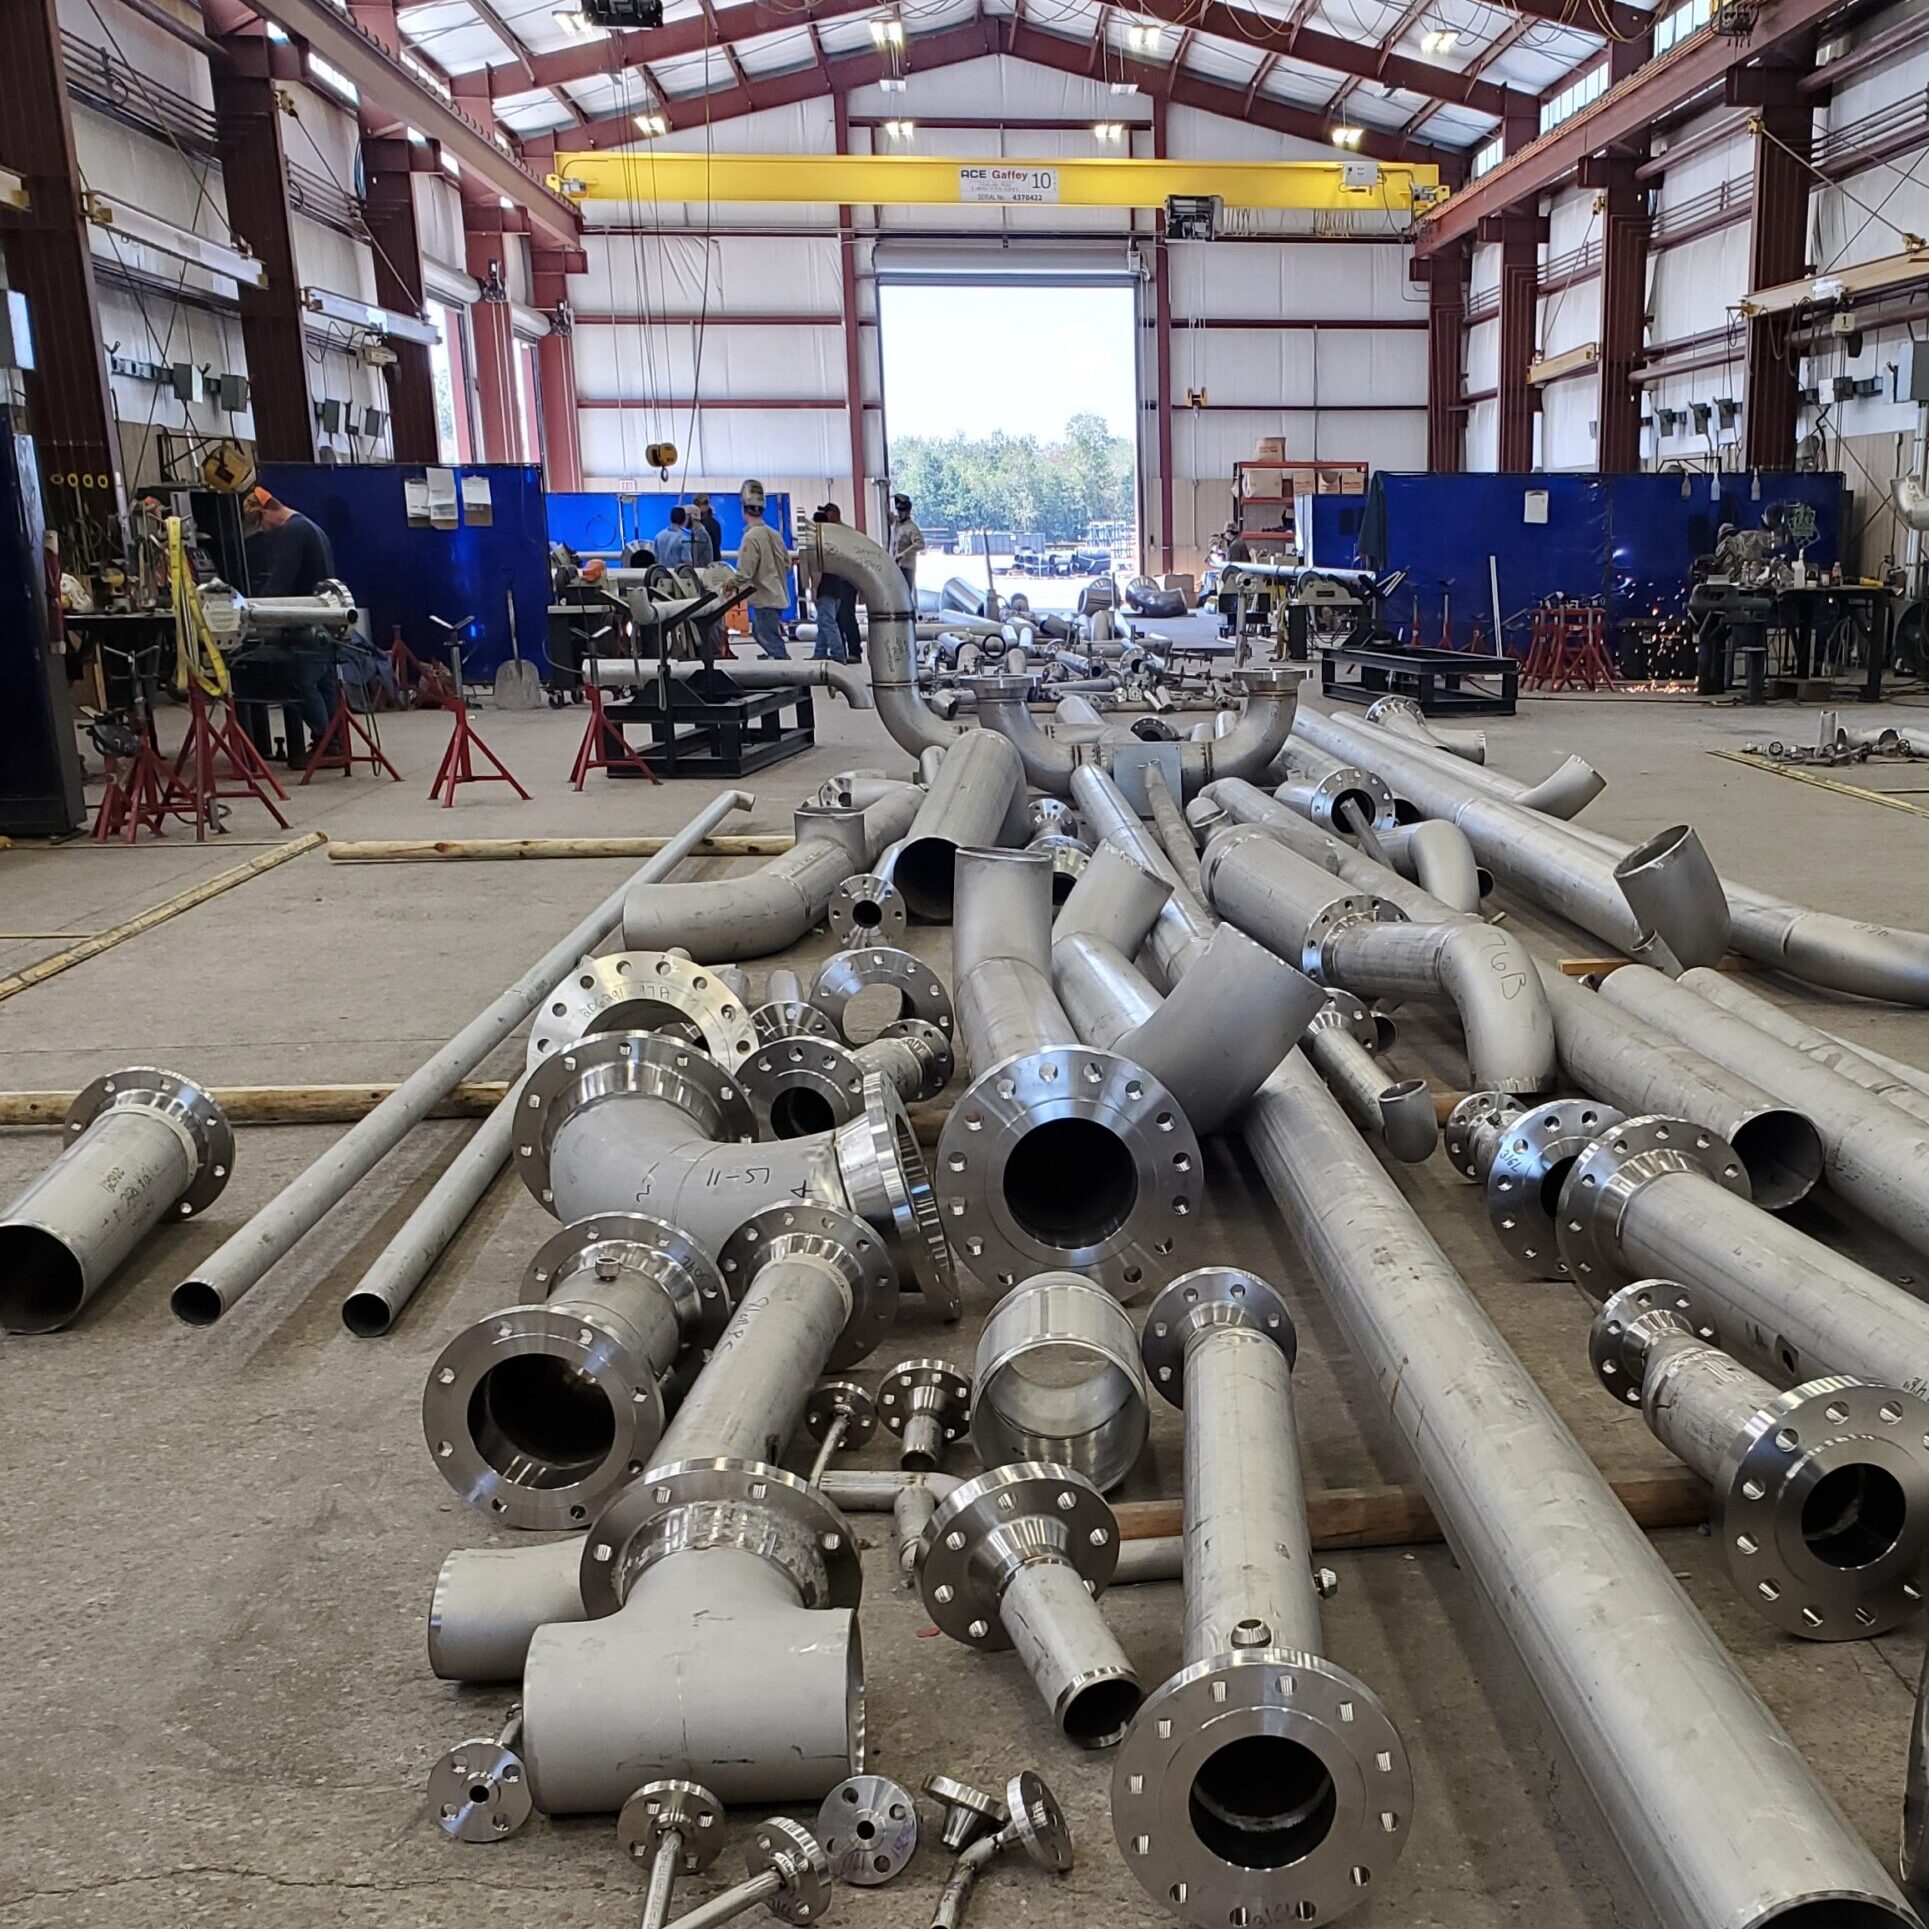 Pipes in a large storage facility